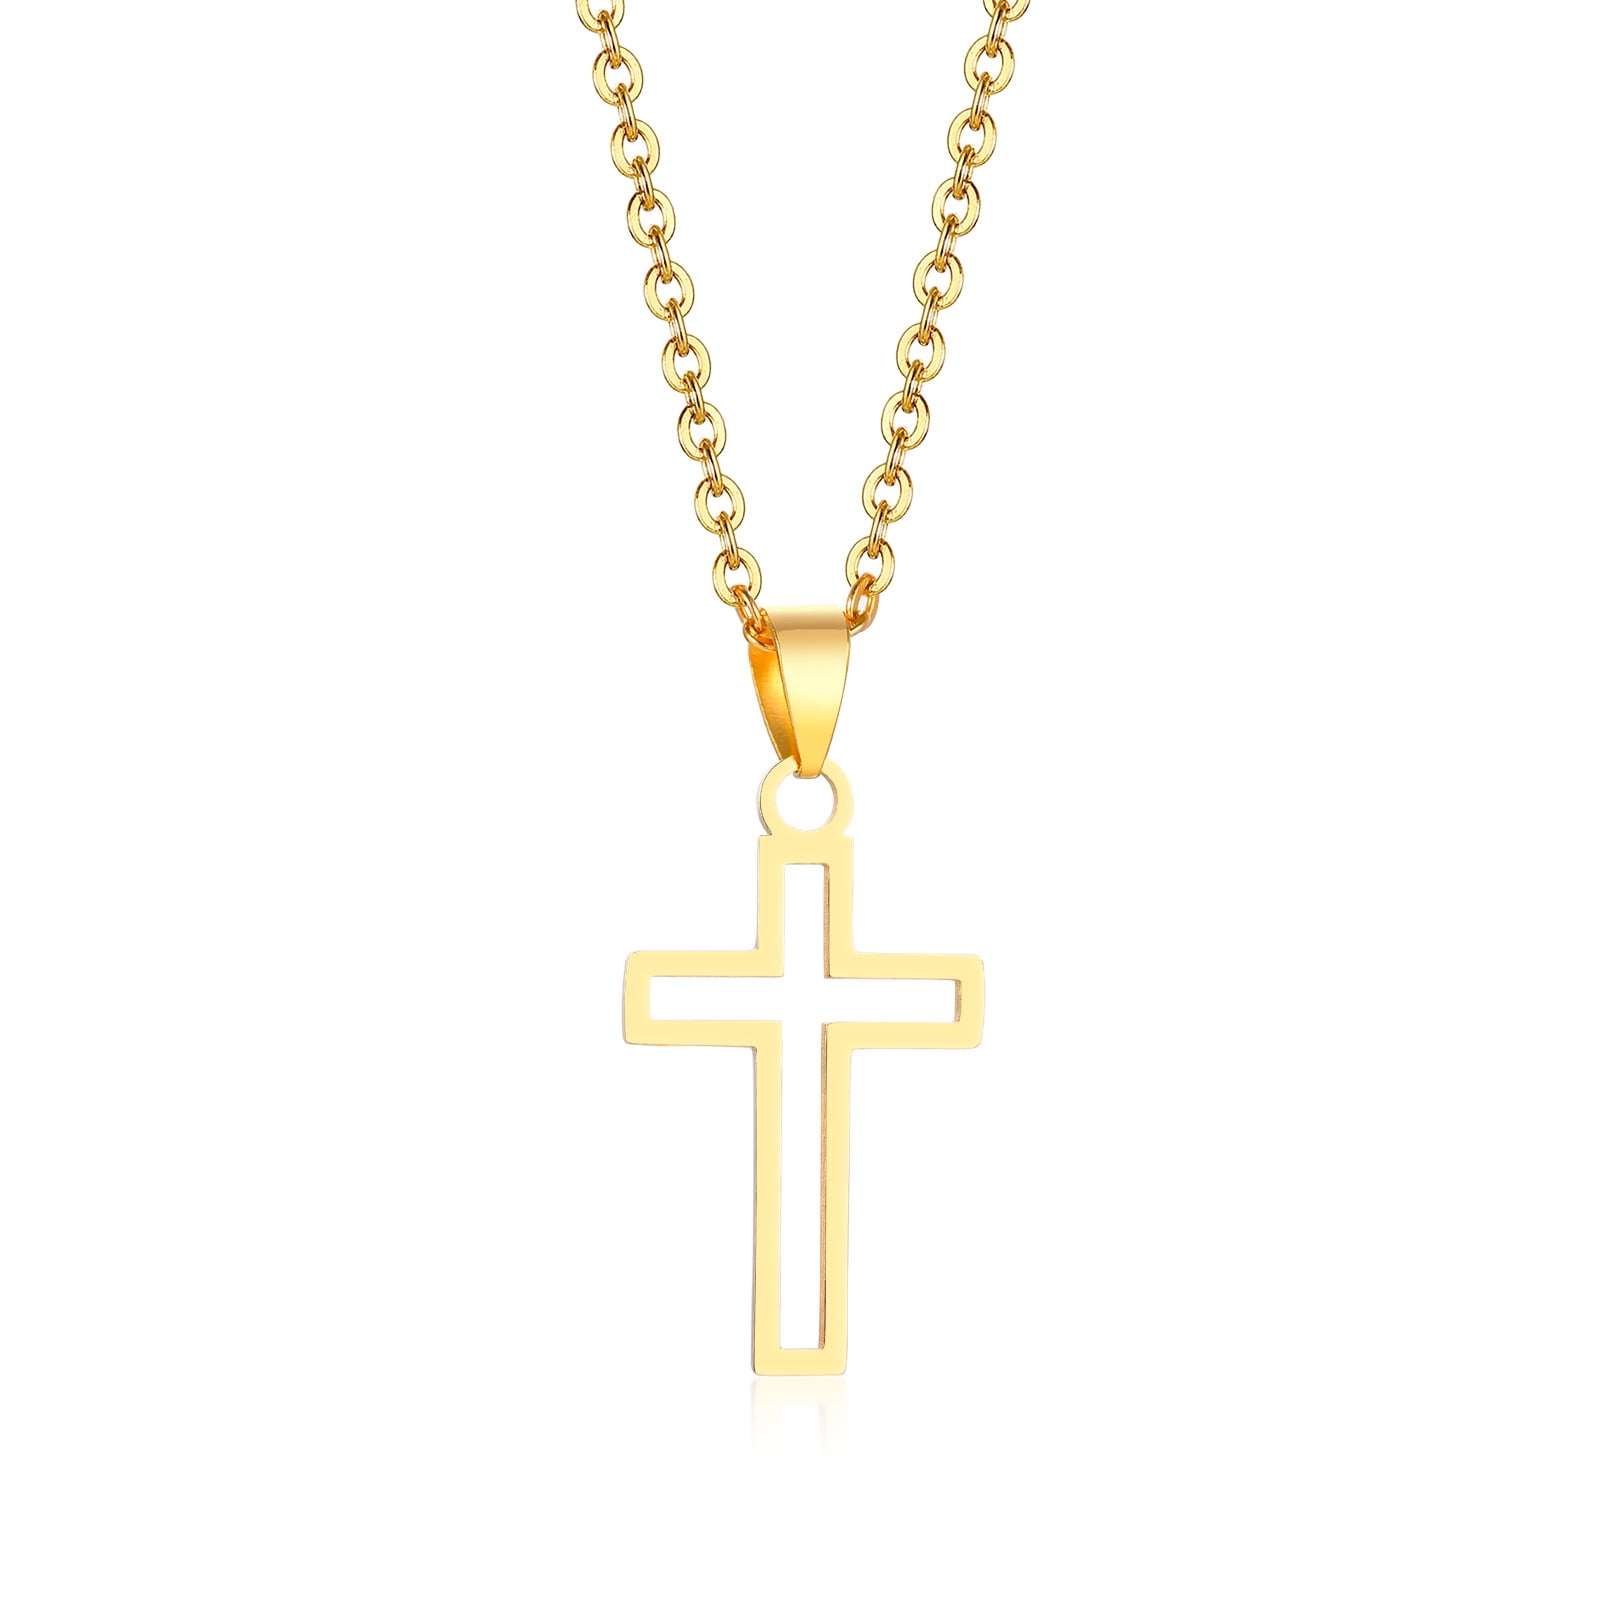 Stainless Steel Polished Cushion Religious Faith Cross Necklace 24 Inch Jewelry Gifts for Women